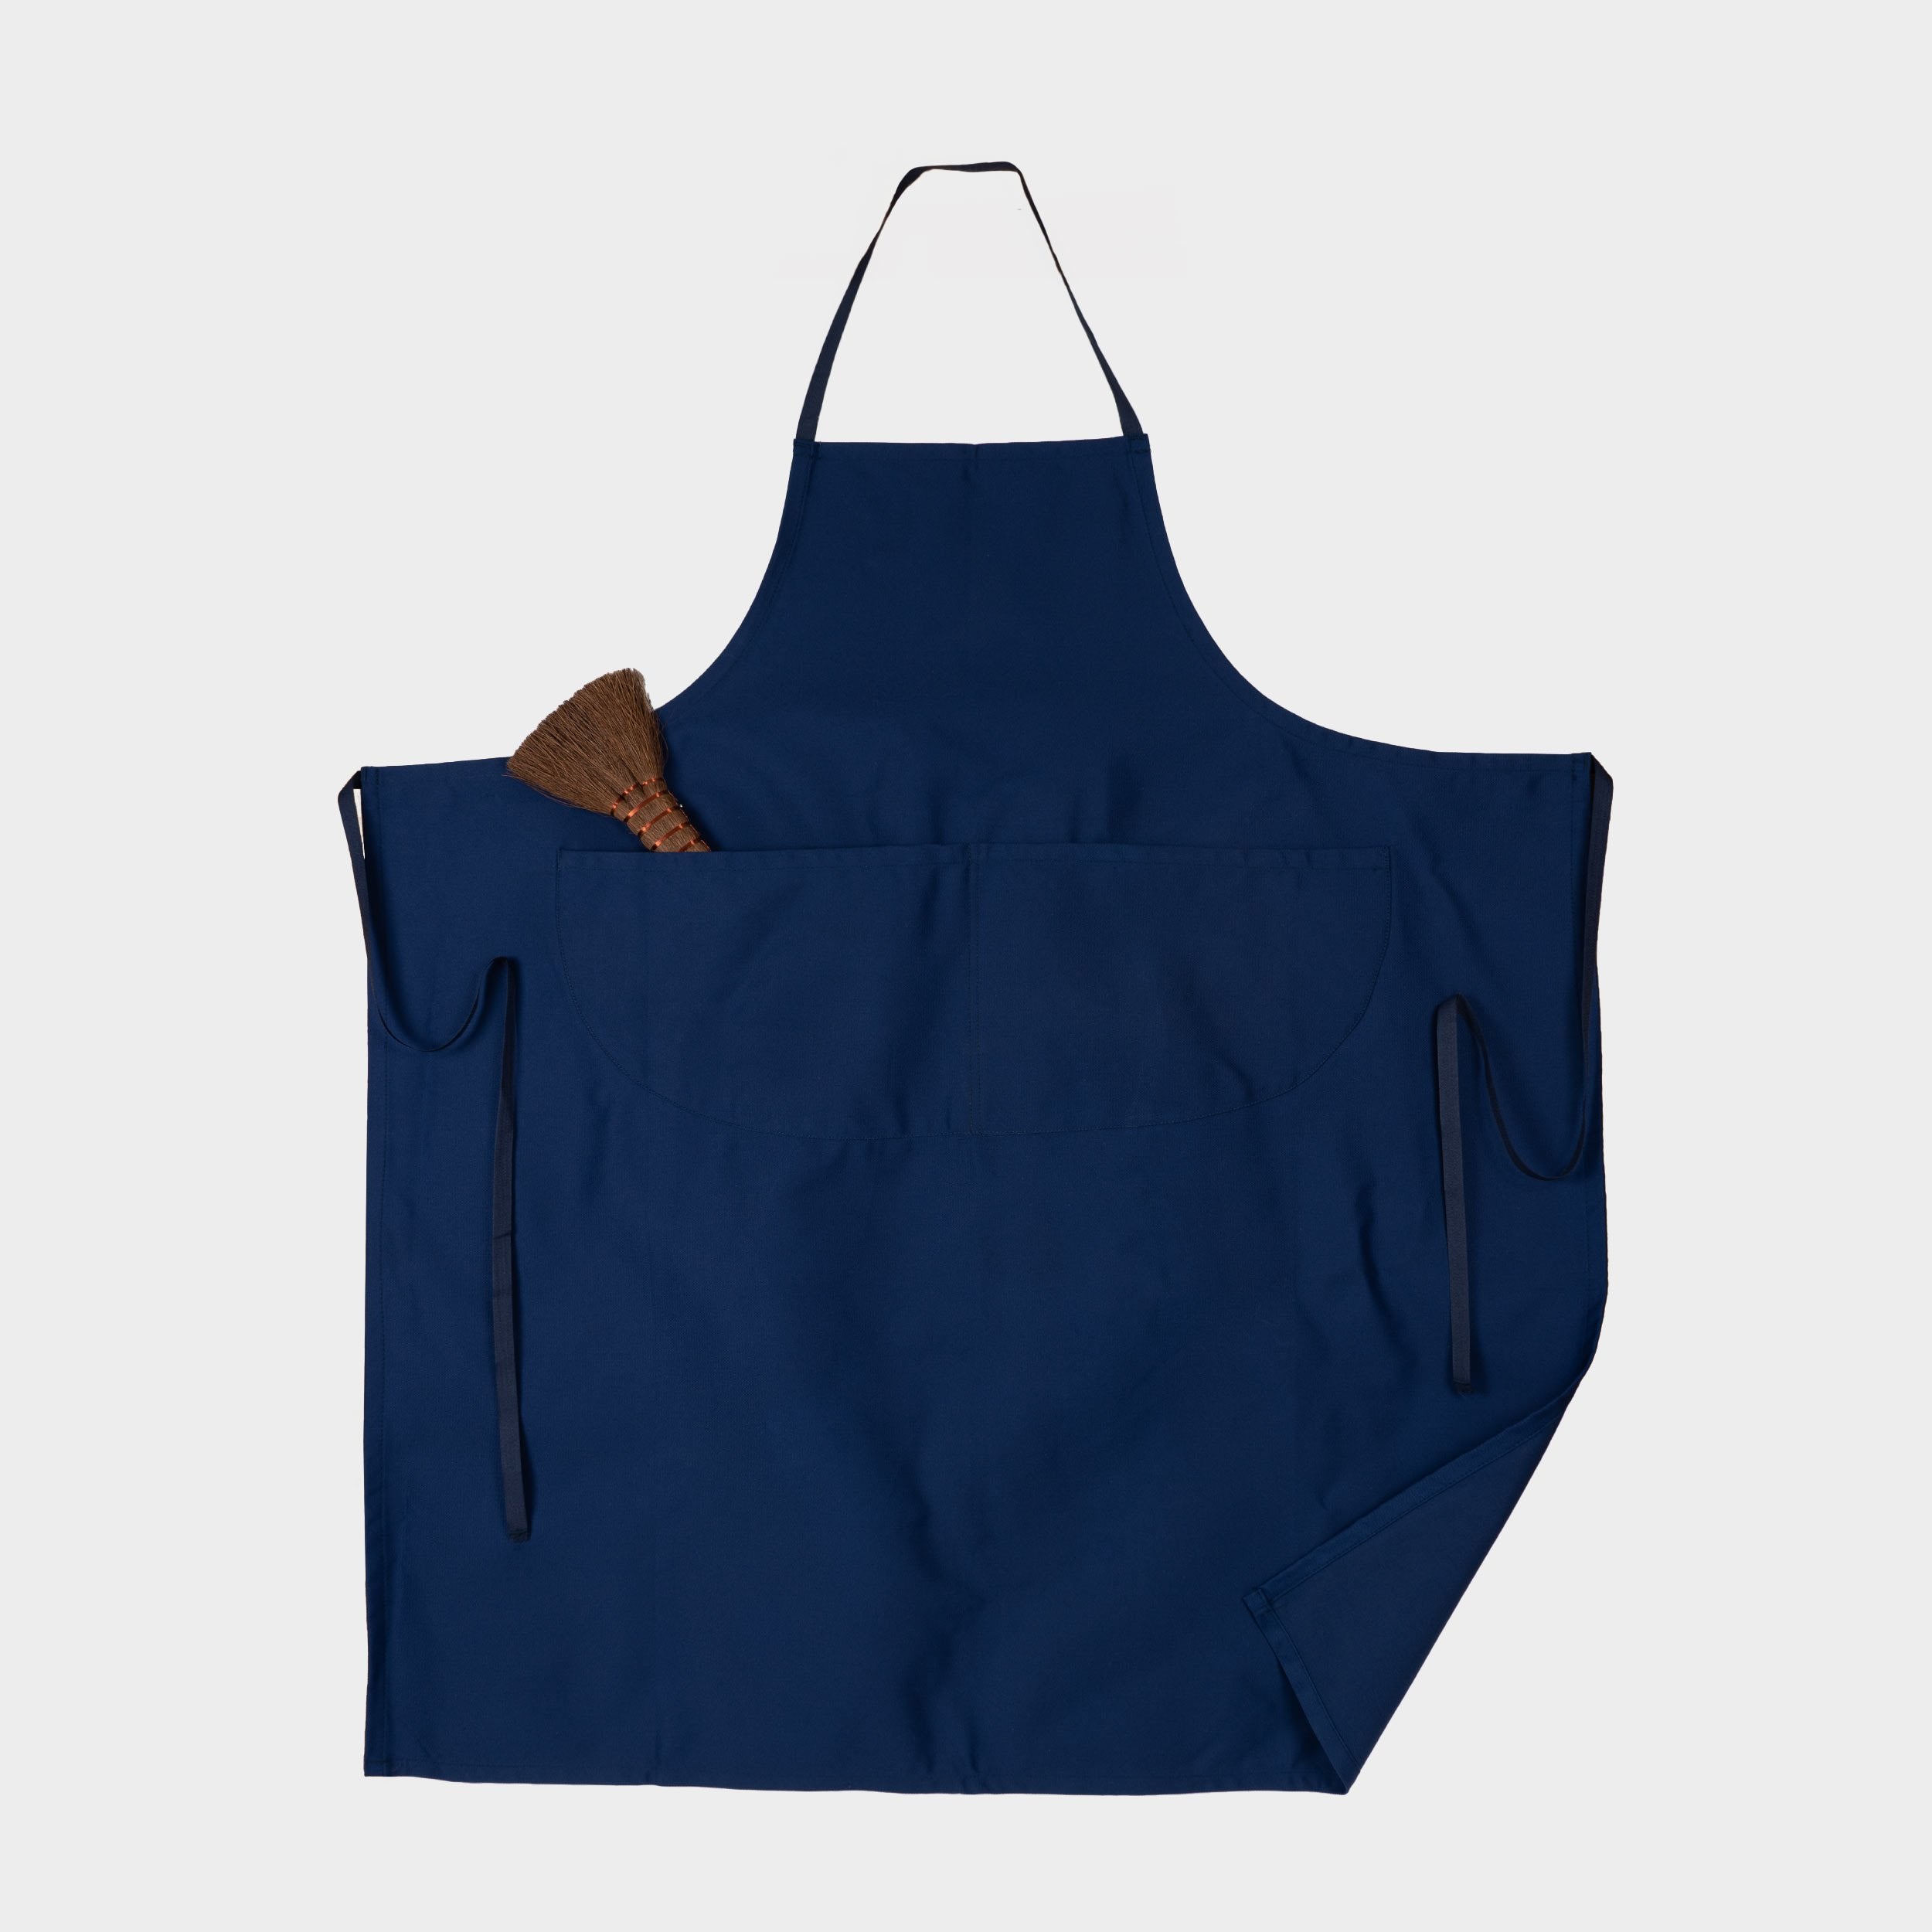 Le Laboureur French Cotton Work Pant in Navy — GARDENHEIR